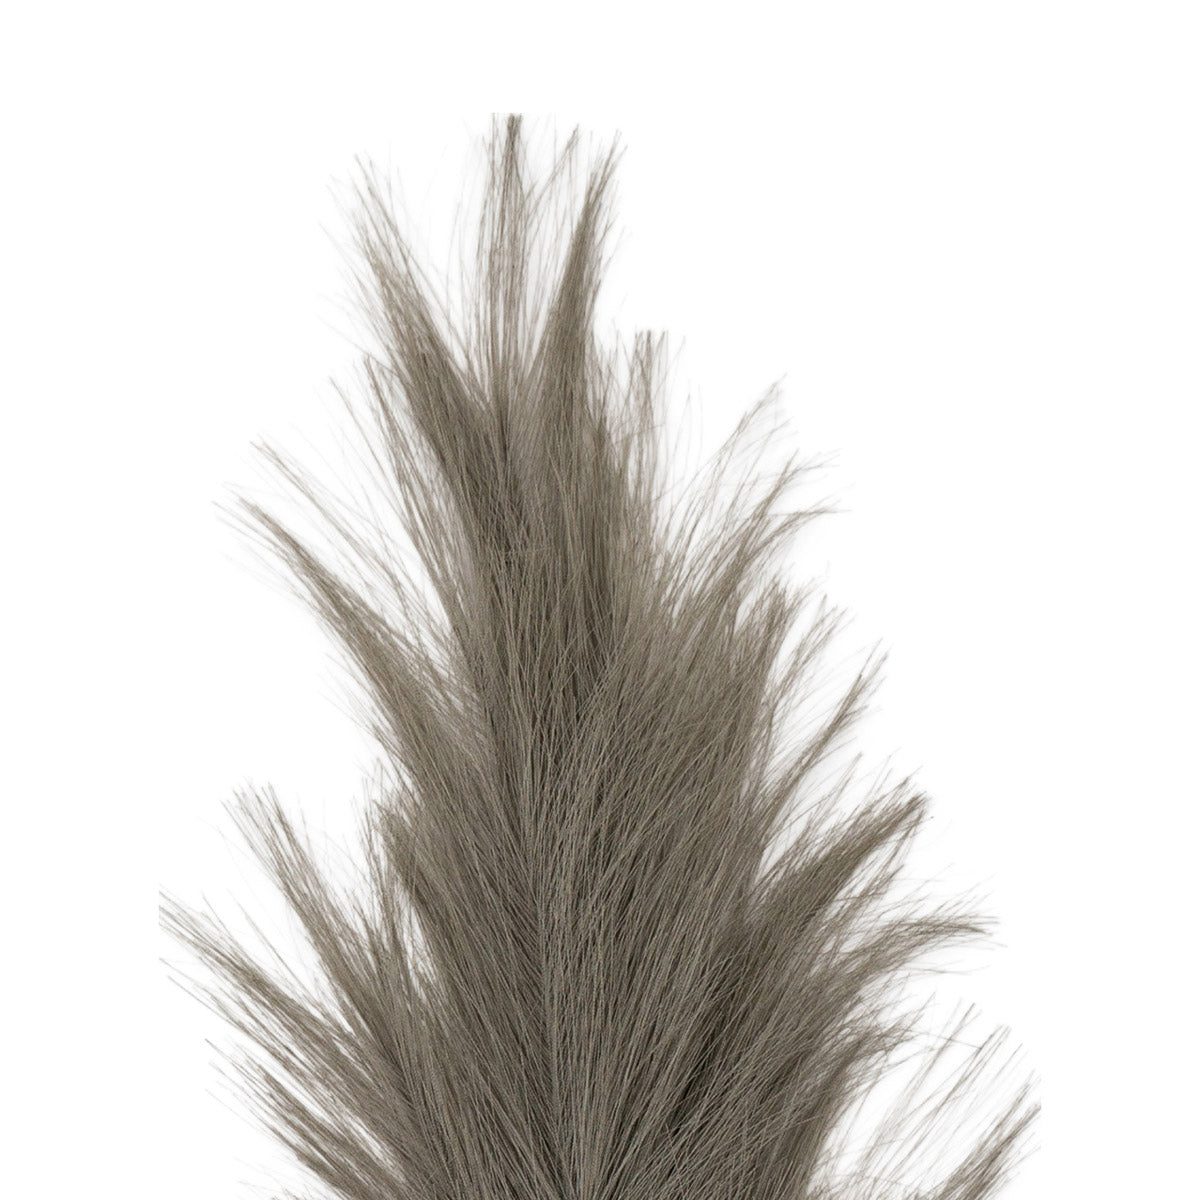 Artificial Tall Fluffy Grey Feather Pampas Grass Bunch of 3 Stems– Click Style